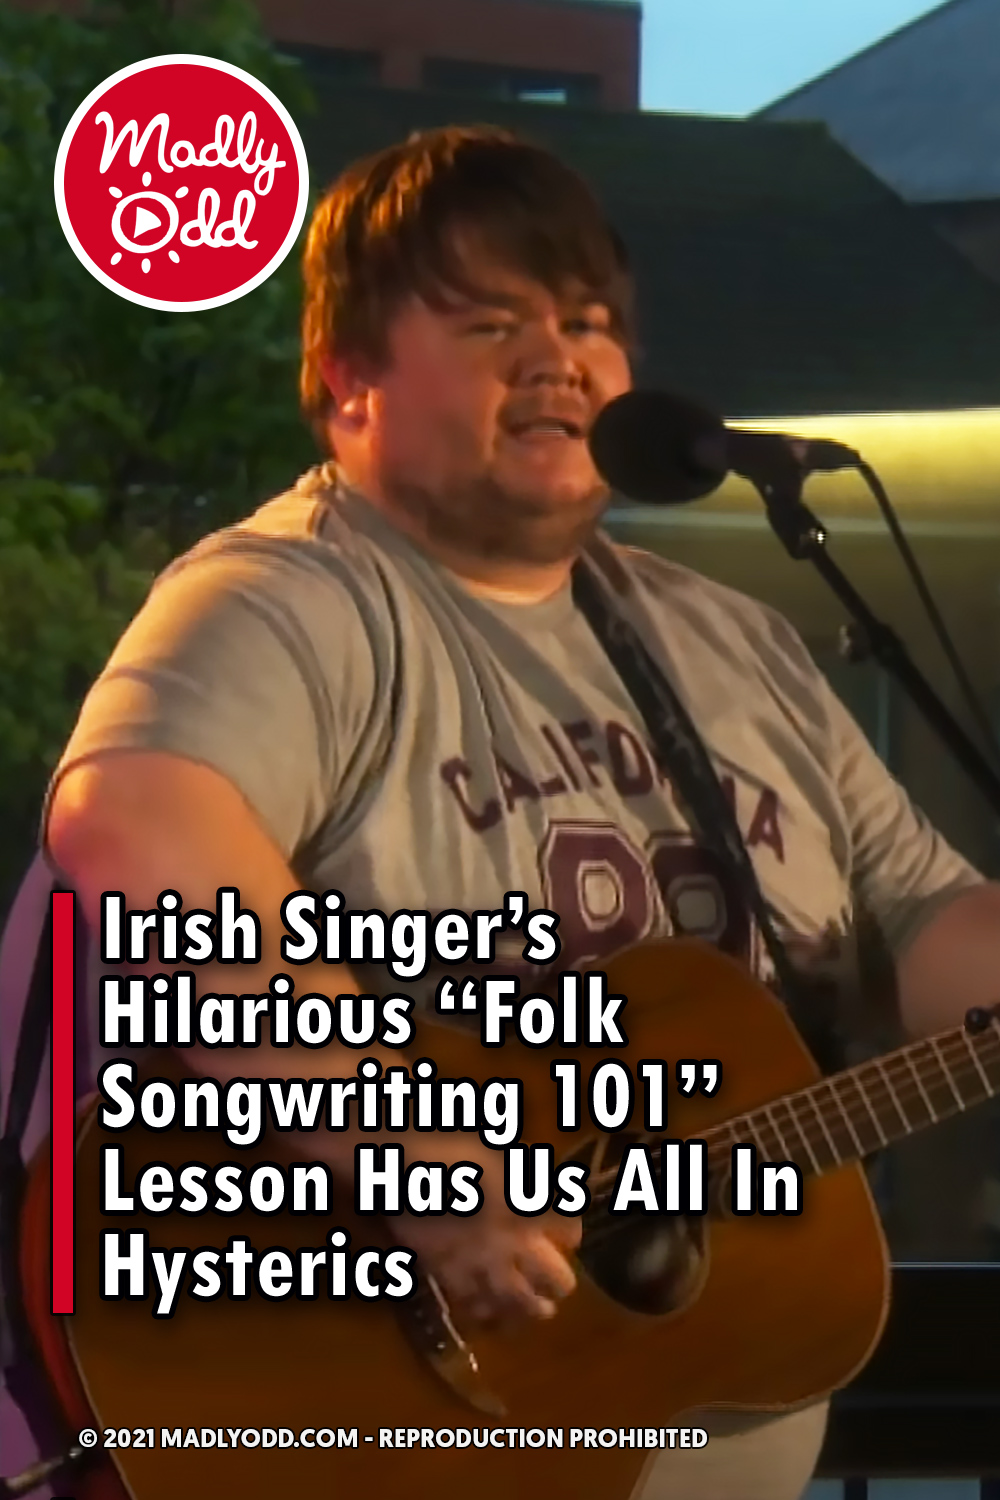 Irish Singer’s Hilarious “Folk Songwriting 101” Lesson Has Us All In Hysterics